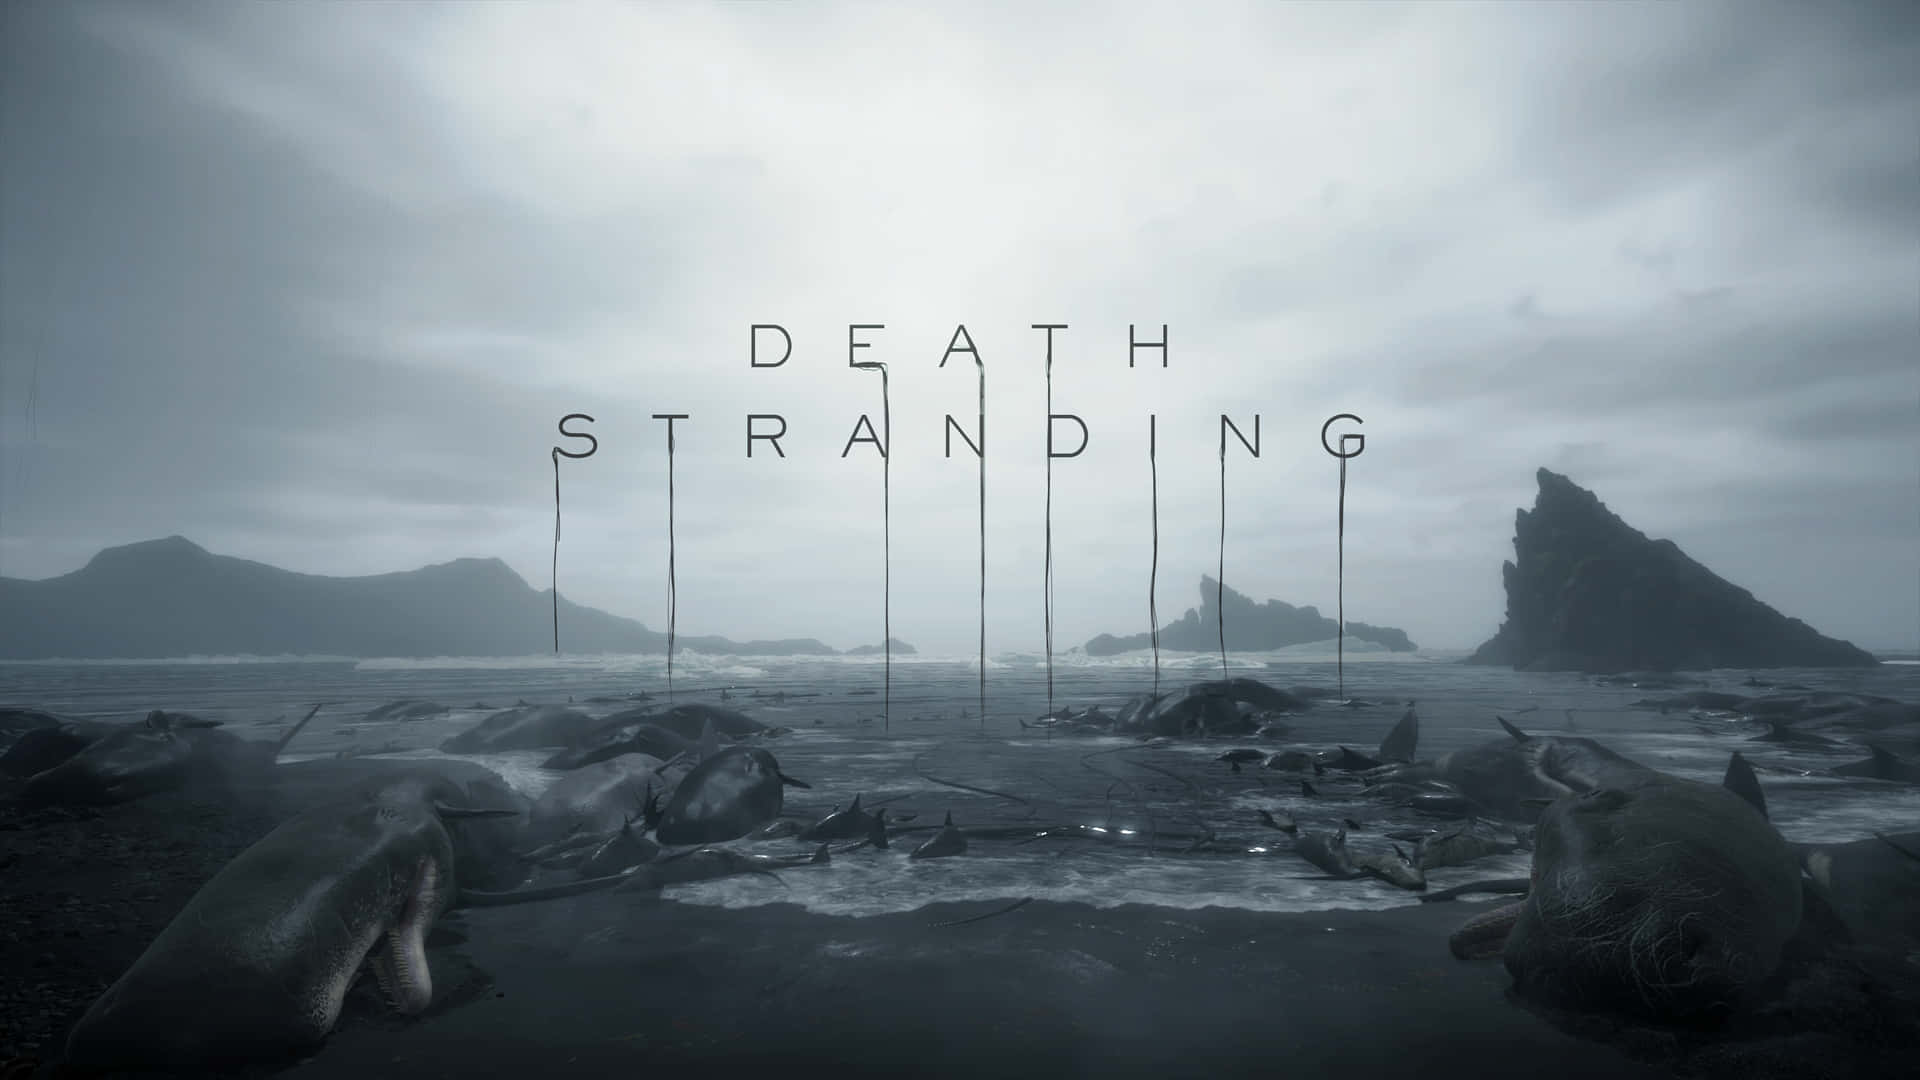 Step into the world of Death Stranding